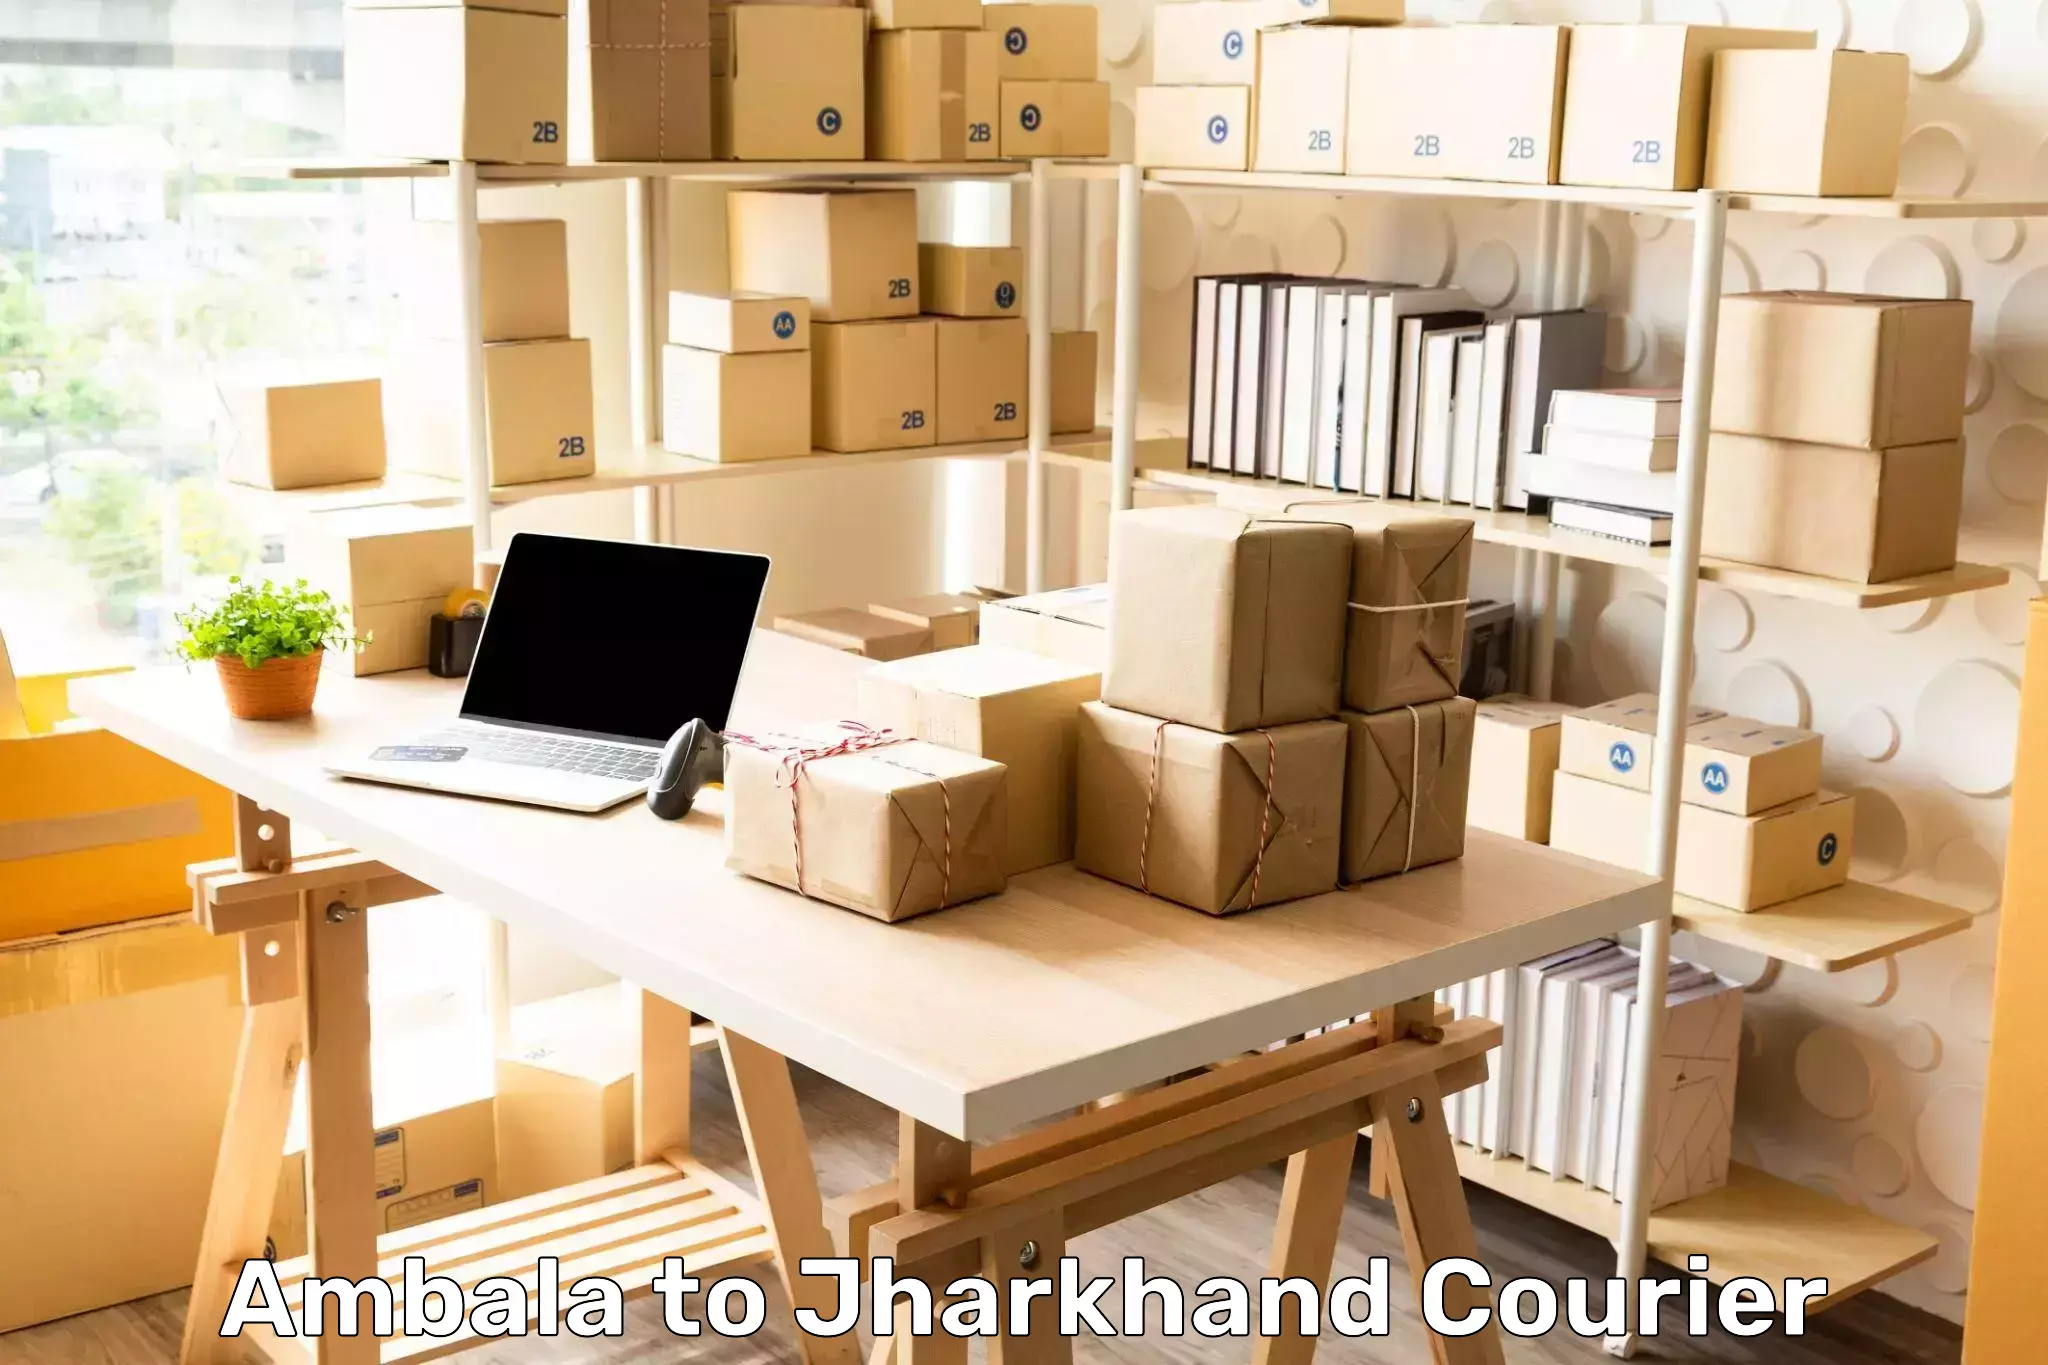 Nationwide delivery network Ambala to Jharkhand